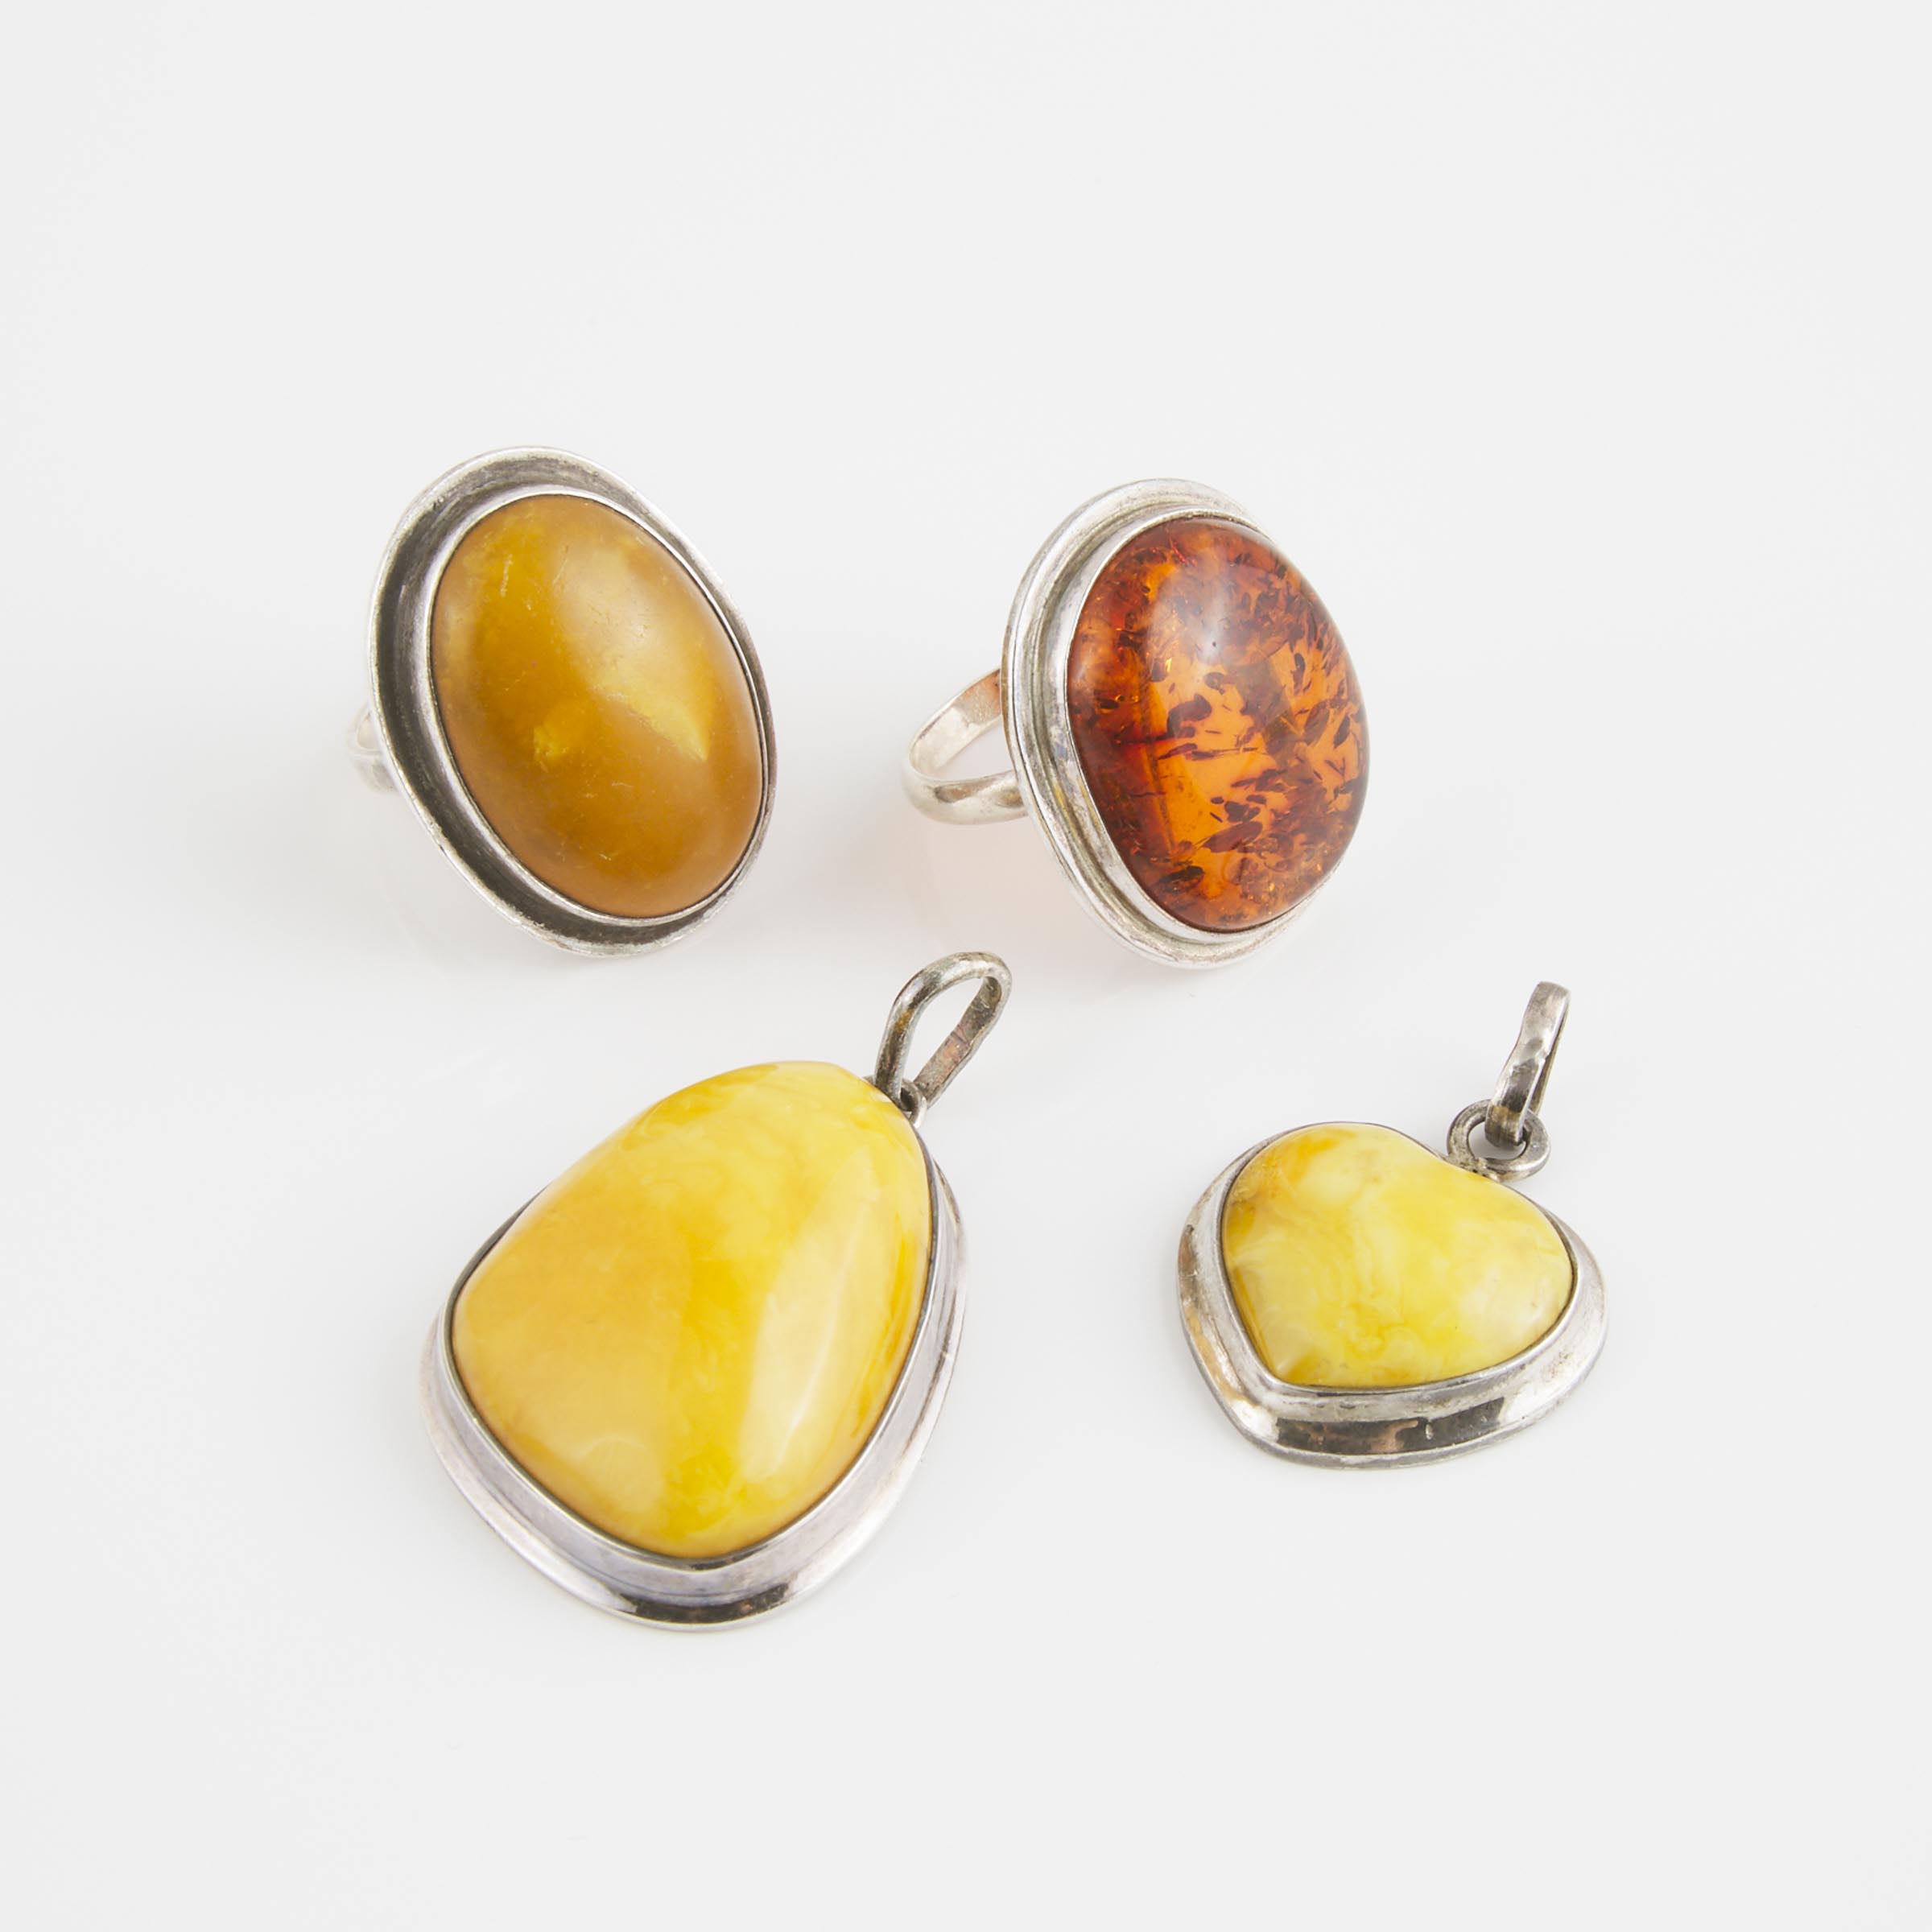 4 Pieces Of Polish Sterling Silver And Amber Jewellery